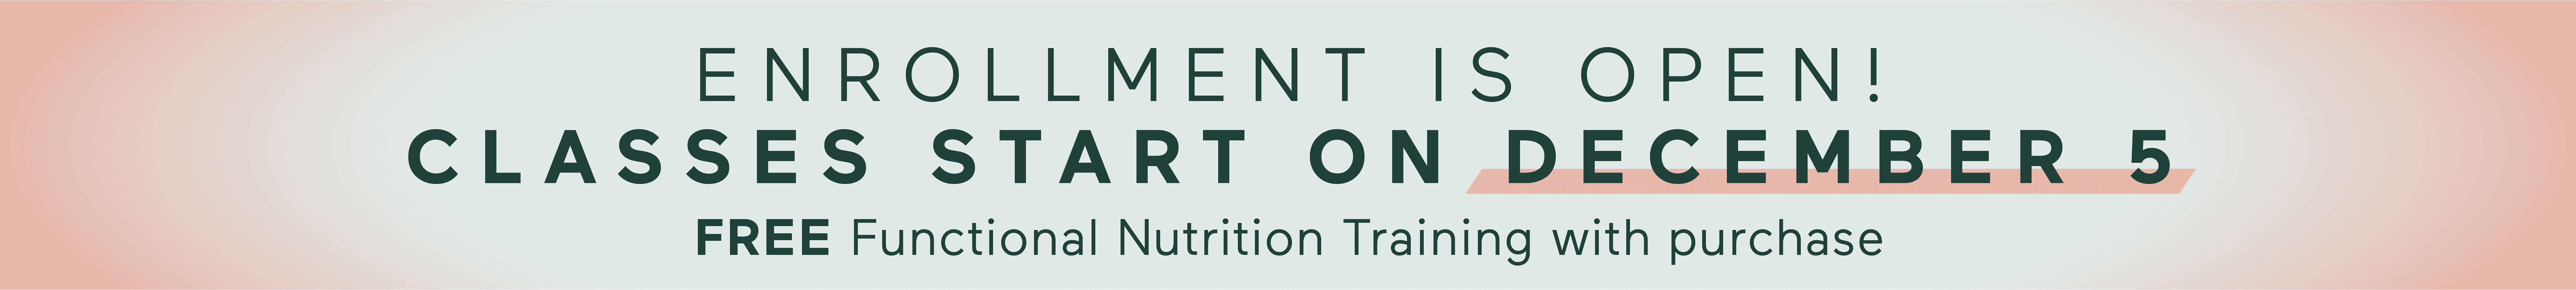 Enrollment is open. Classes start December 5th. Free functional nutrition training free with purchase.